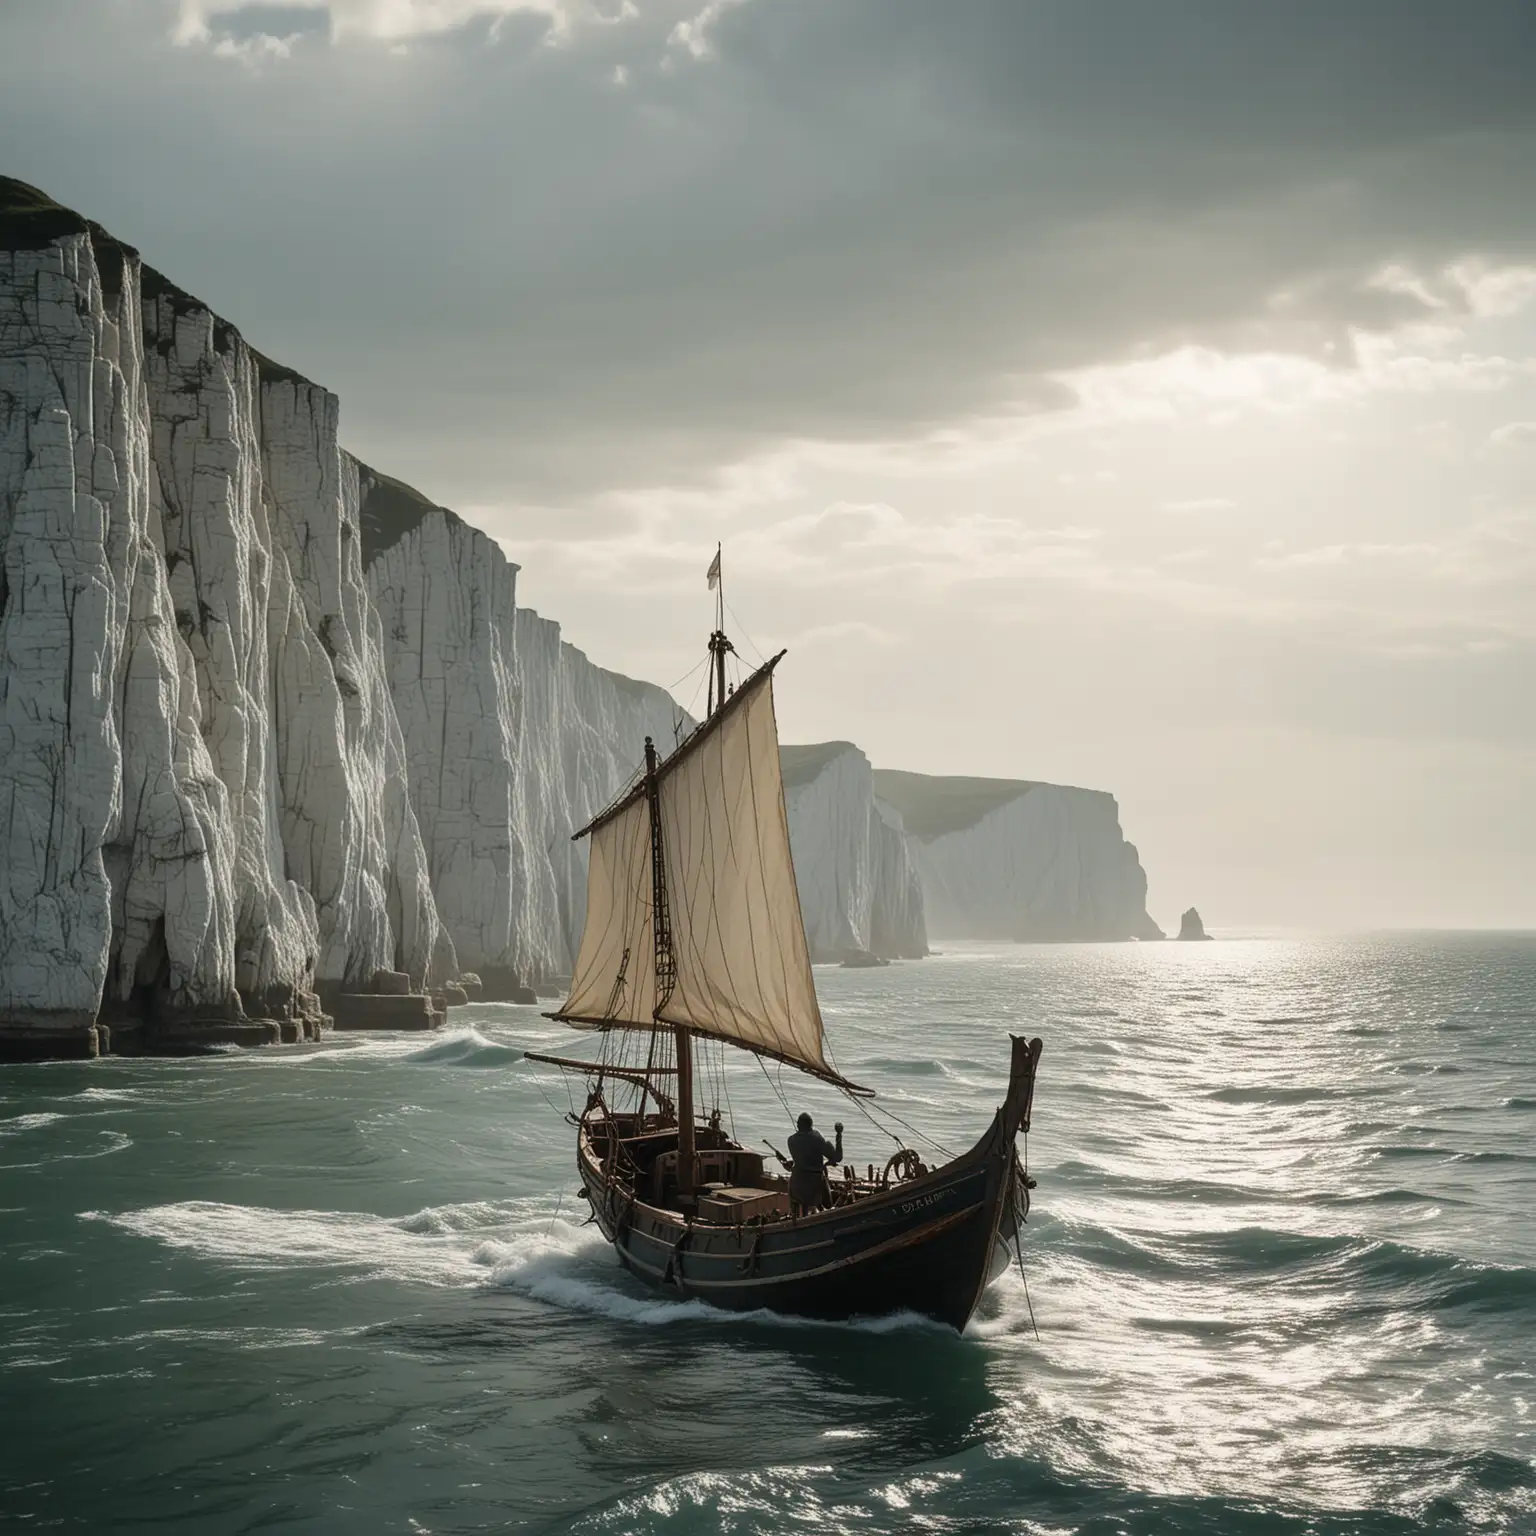 Sailing Adventure Medieval Fishing Boat on Open Sea with Dover Cliffs